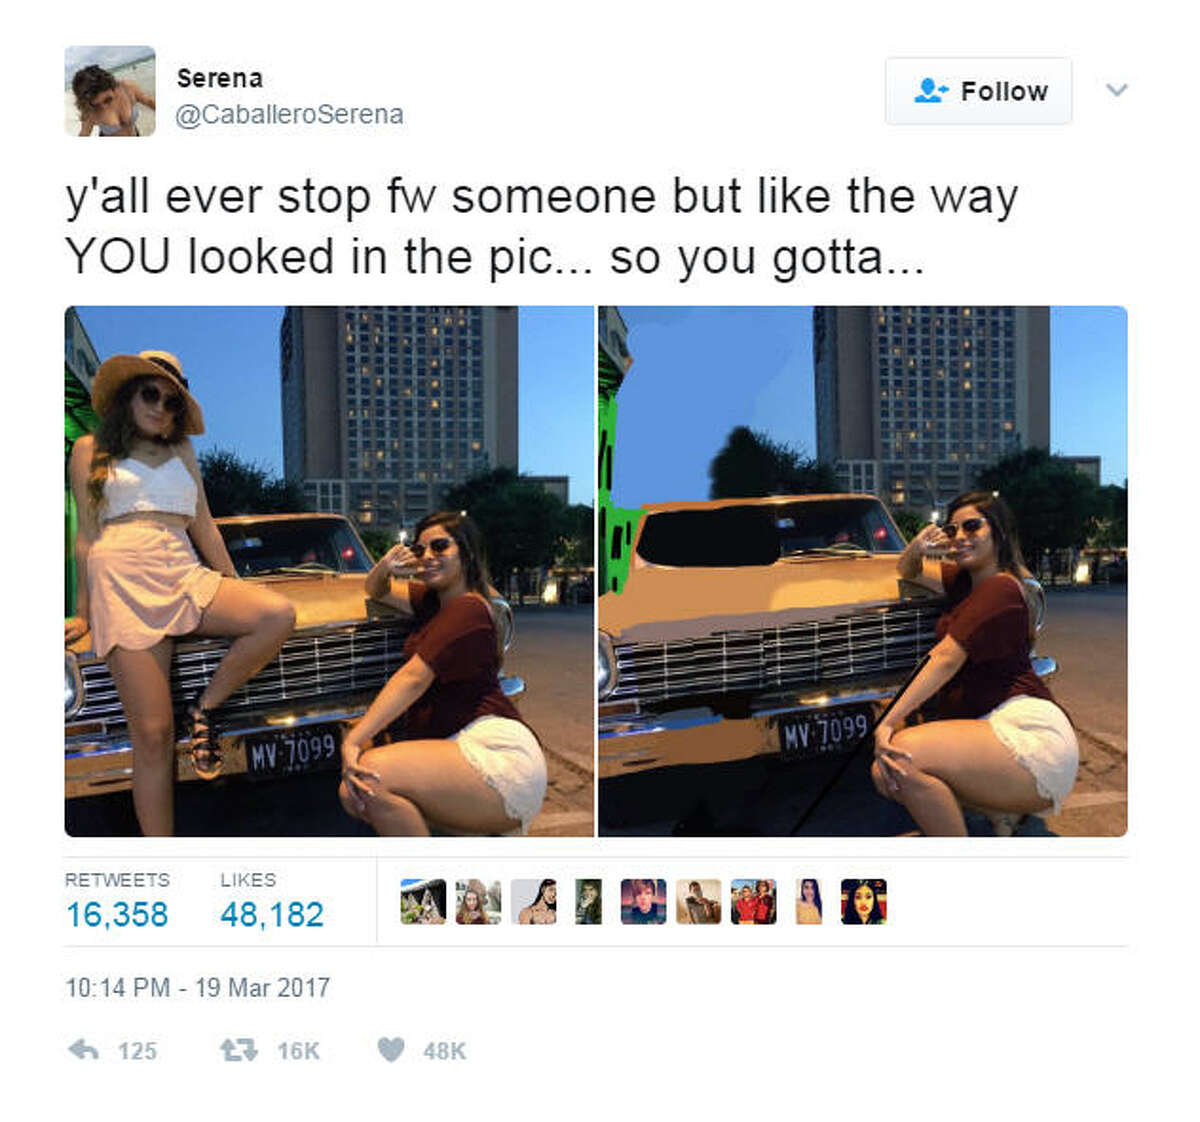 Texas teen Serena Caballero painted over someone in a photo of herself and has gone viral for her Photoshop technique. A thread of memes began following the tweet. Source: Twitter